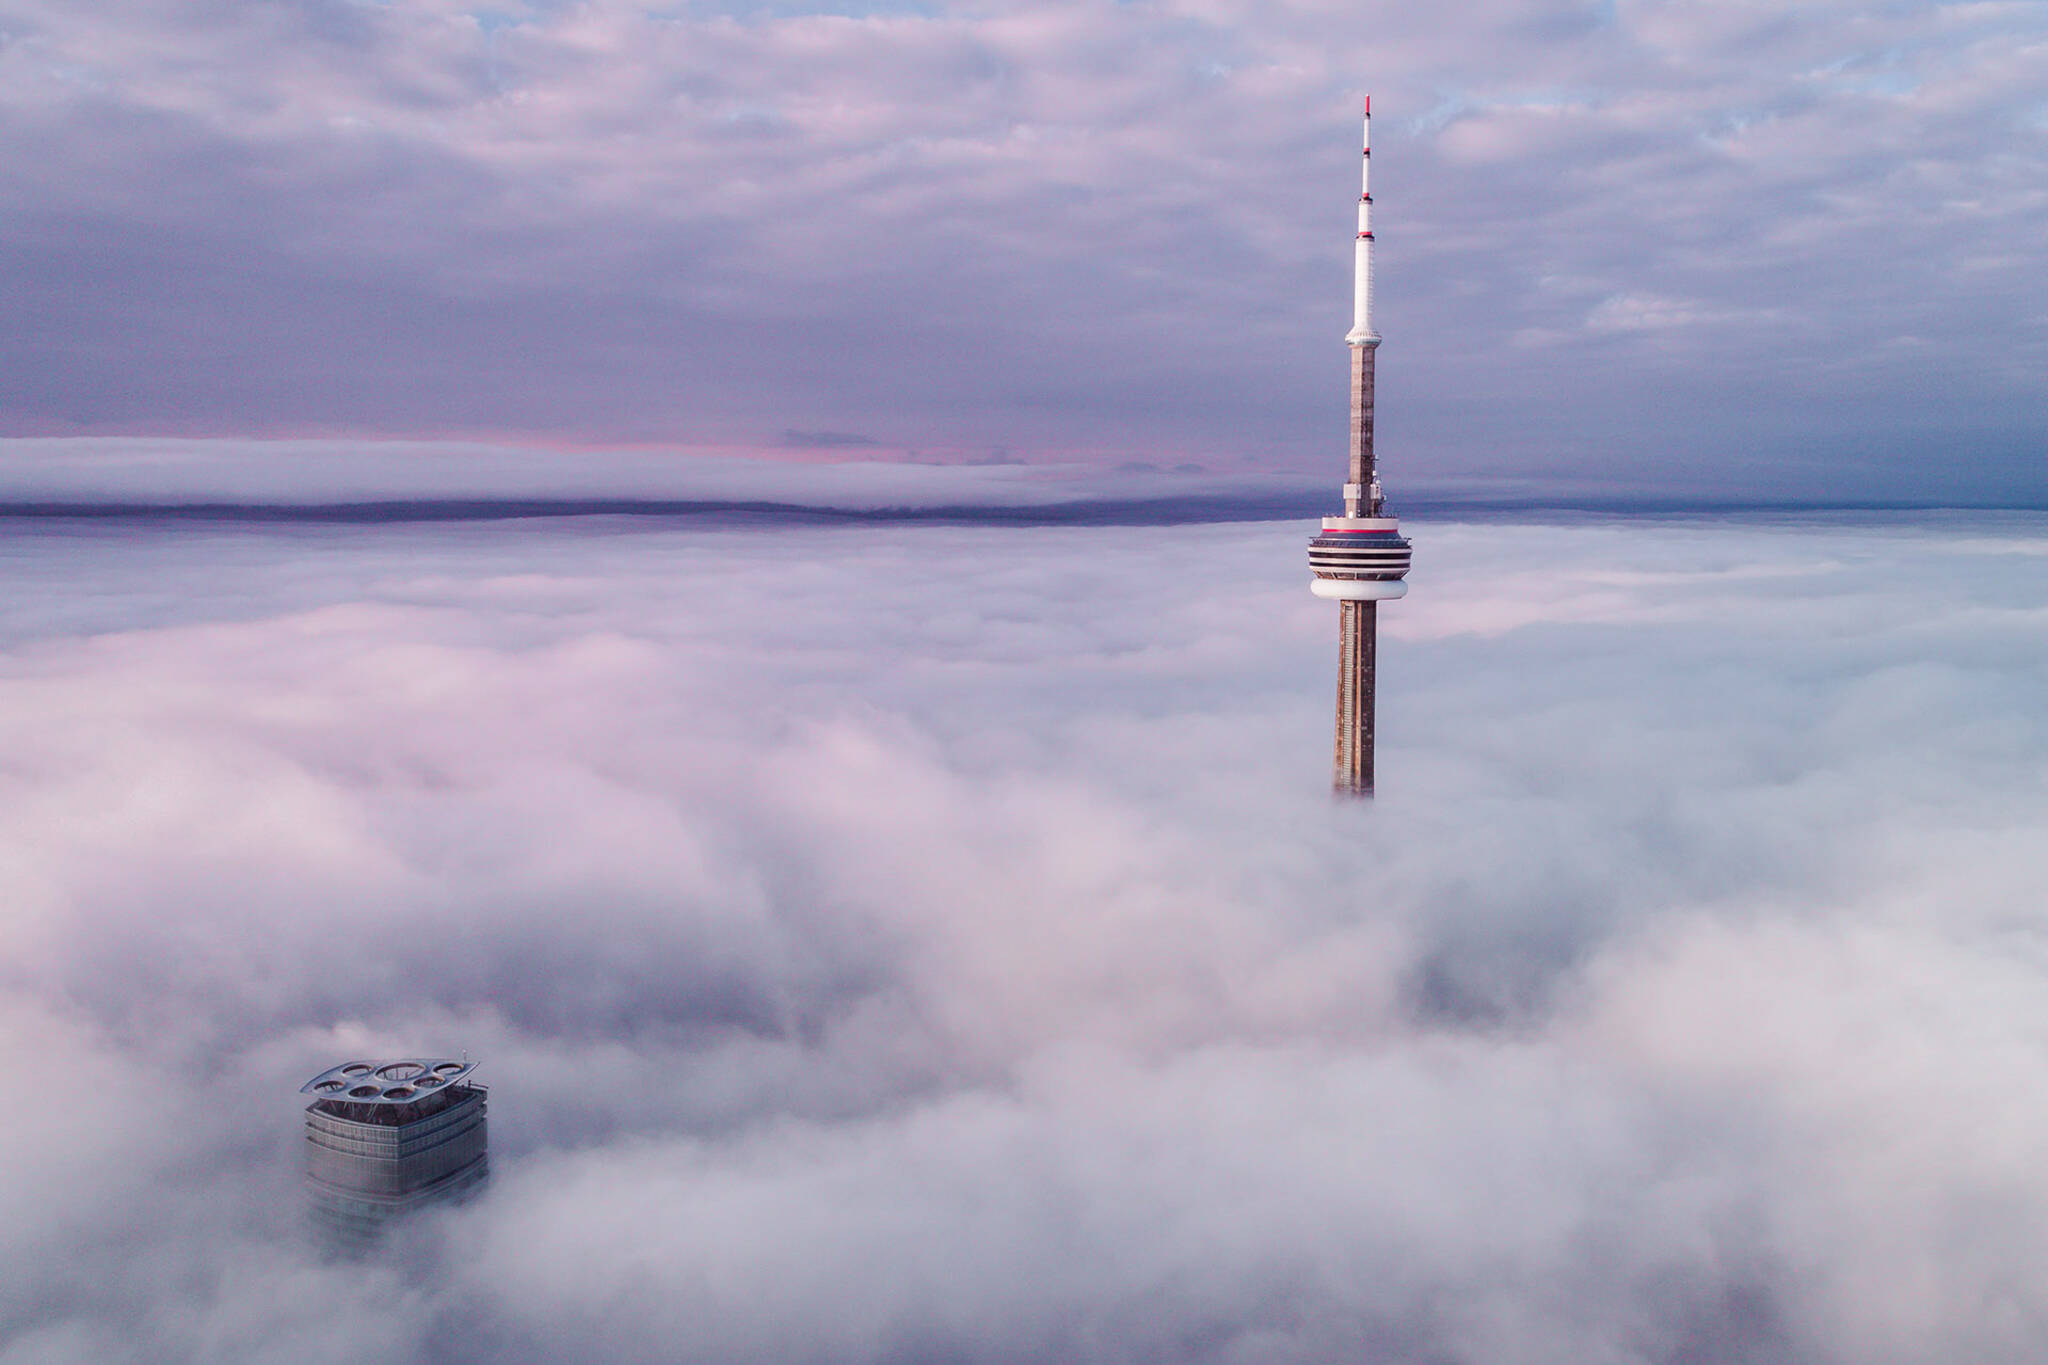 Thick Winter Fog Makes Toronto Look Beautifully Surreal